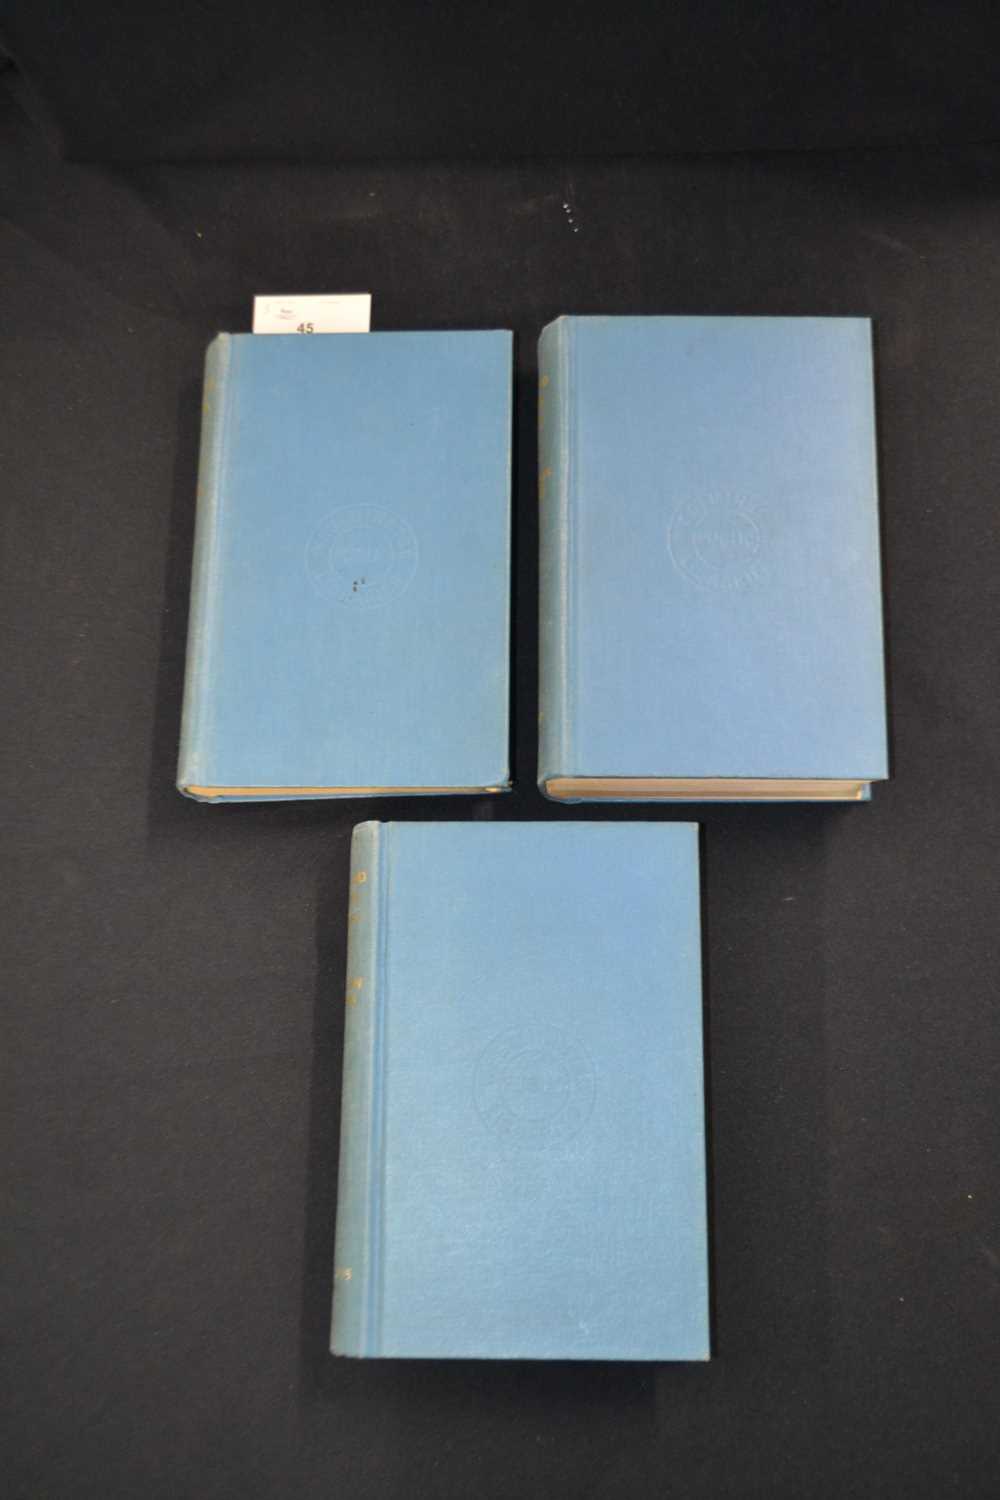 A RICHARDSON AND A HURD: THE NAVAL AND SHIPPING ANNUAL, 3 volumes.1919, 1921-22, 1924. London, - Image 2 of 2